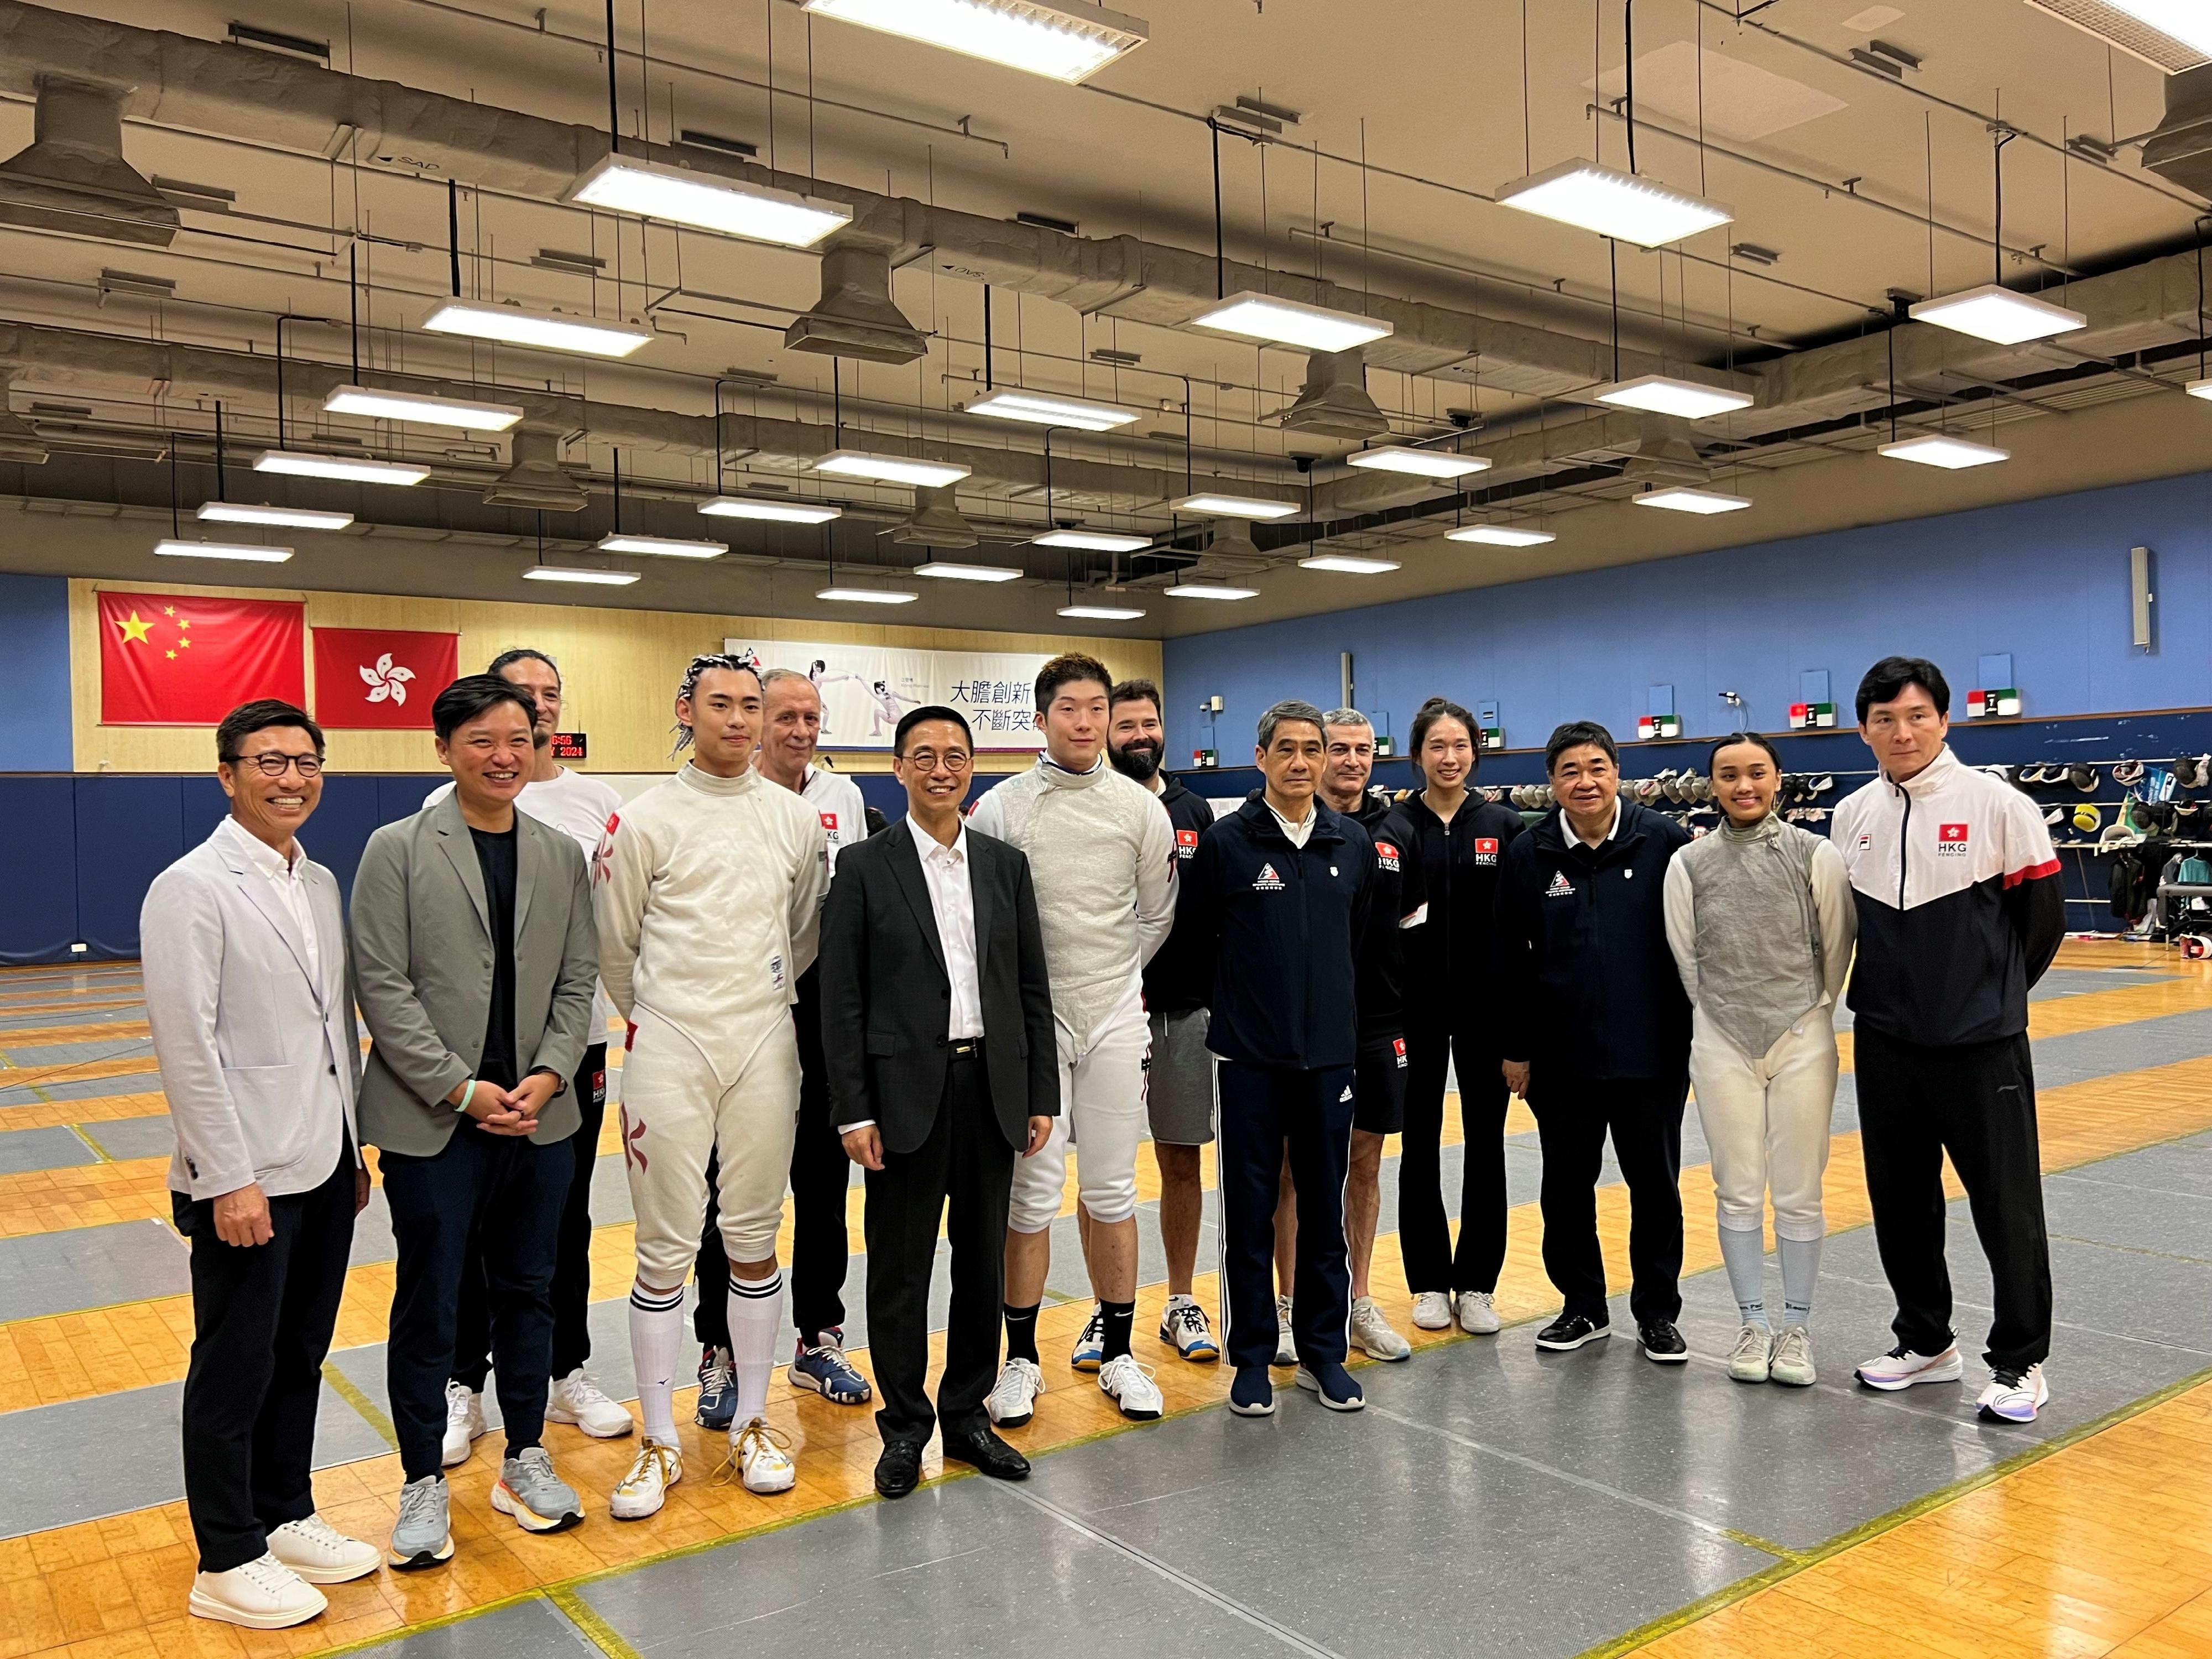 The Secretary for Culture, Sports and Tourism, Mr Kevin Yeung (fourth left, front row), and the Commissioner for Sports, Mr Sam Wong (first left, front row), this afternoon (May 27) visit the fencing hall in the Hong Kong Sports Institute to learn about the training arrangements of athletes, exchange with them and show support to fencing athletes as they prepare for the Olympic Games.